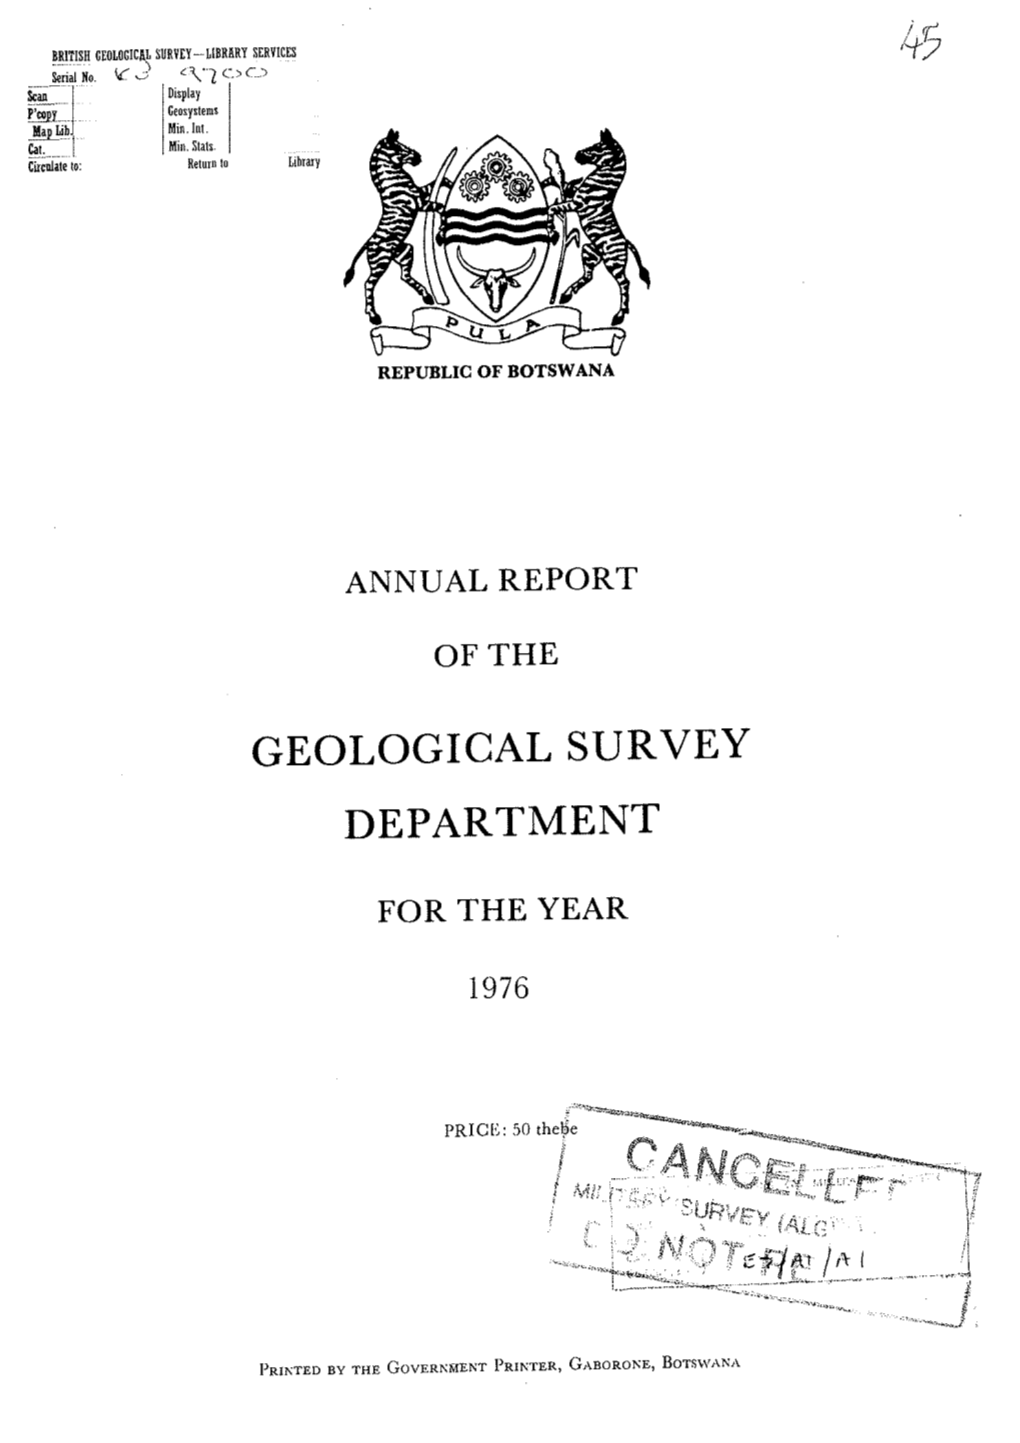 Geological Survey Department